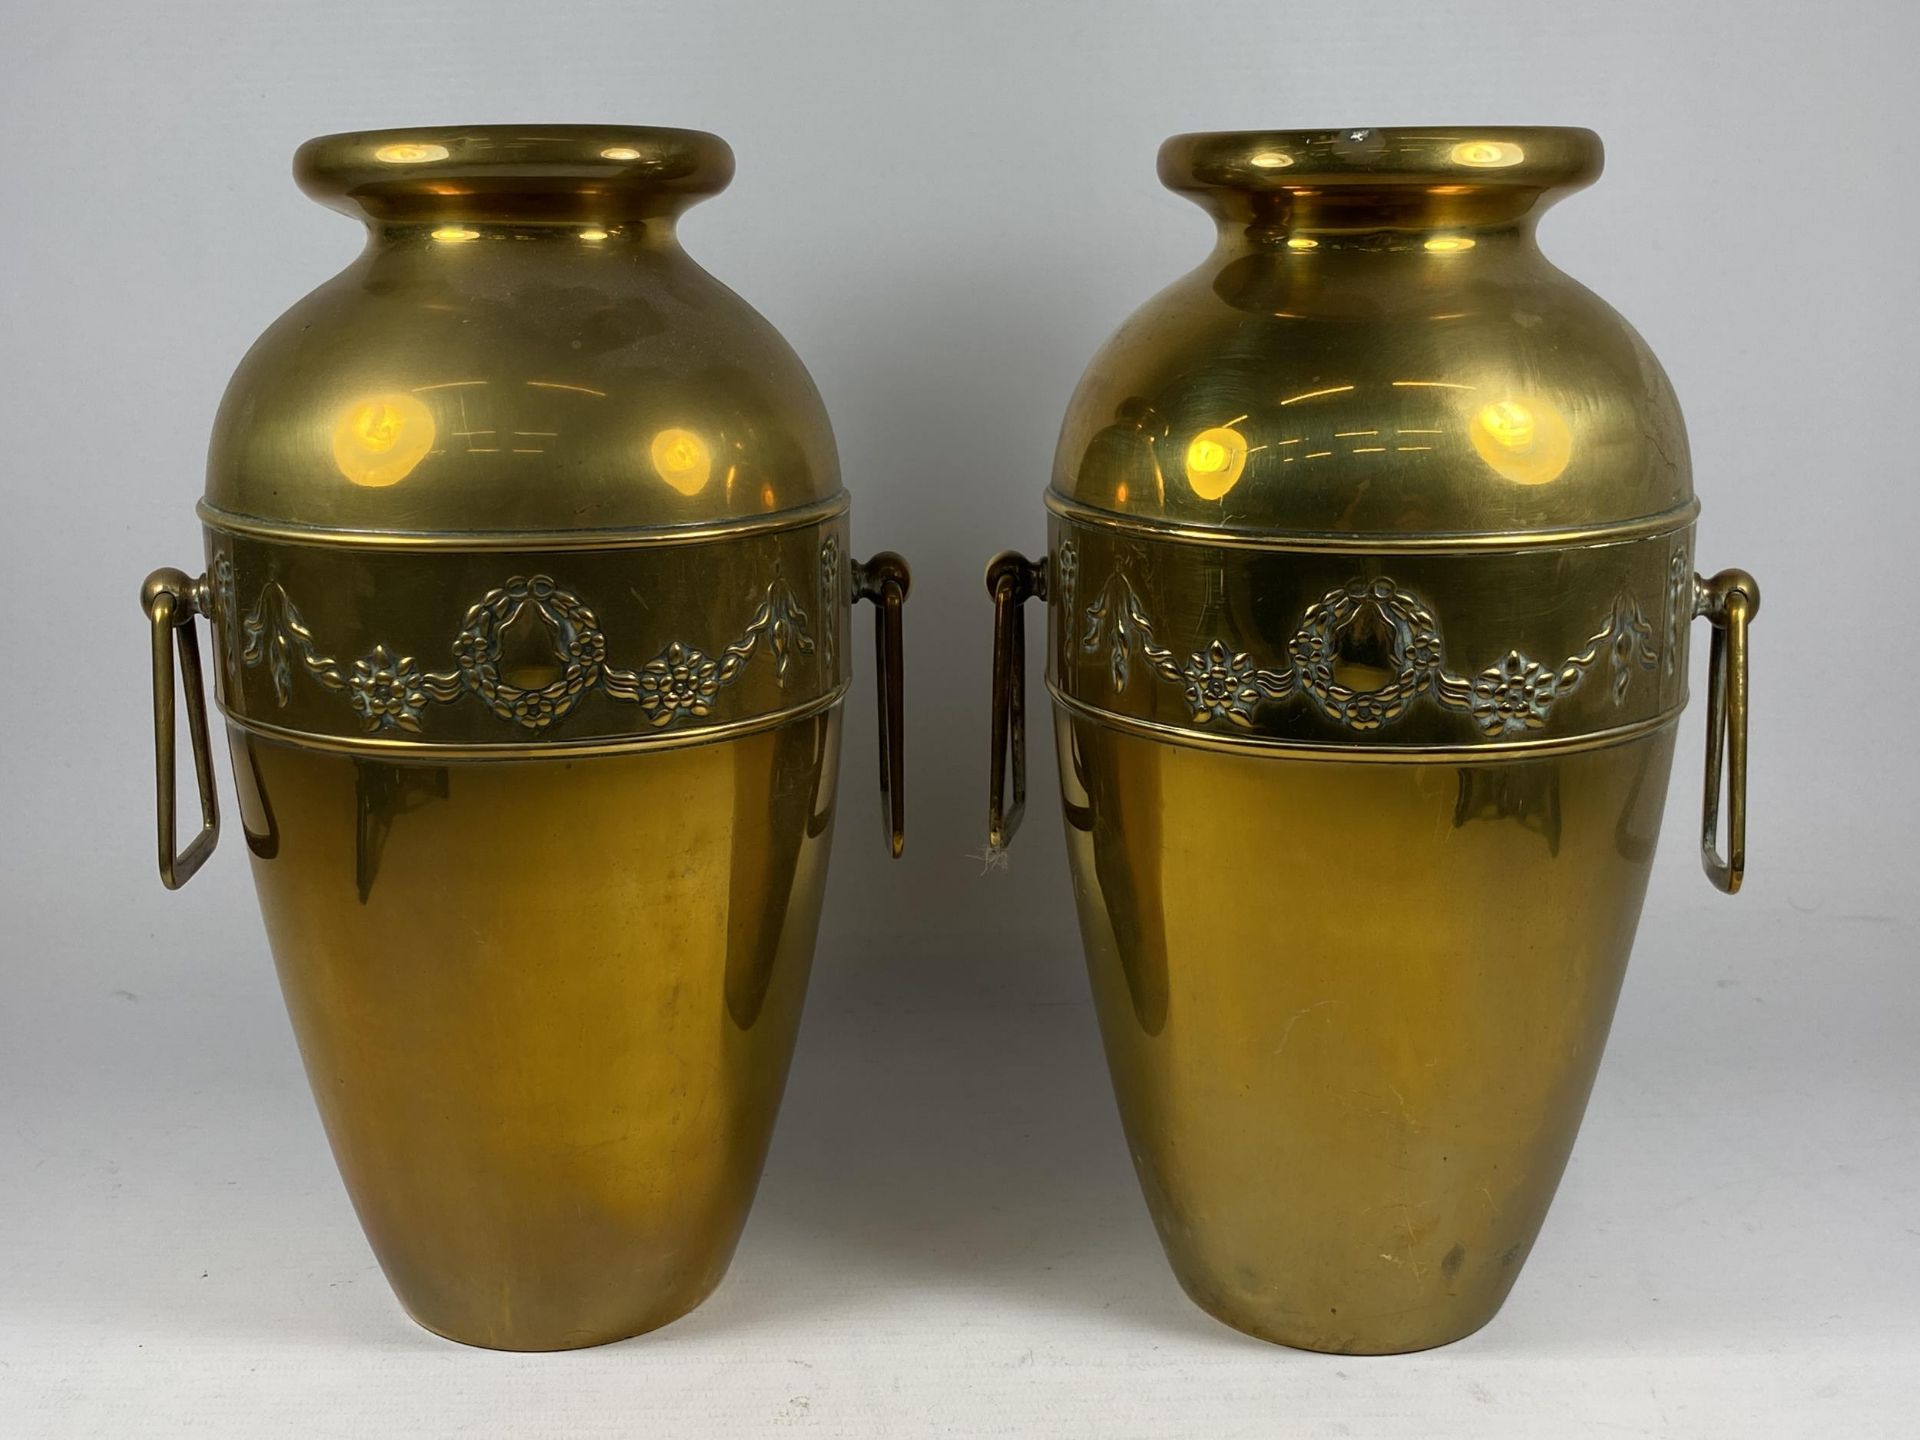 A PAIR OF BRASS BELDRAY ART NOUVEAU VASES WITH FLORAL SWAG DESIGN, HEIGHT 25CM